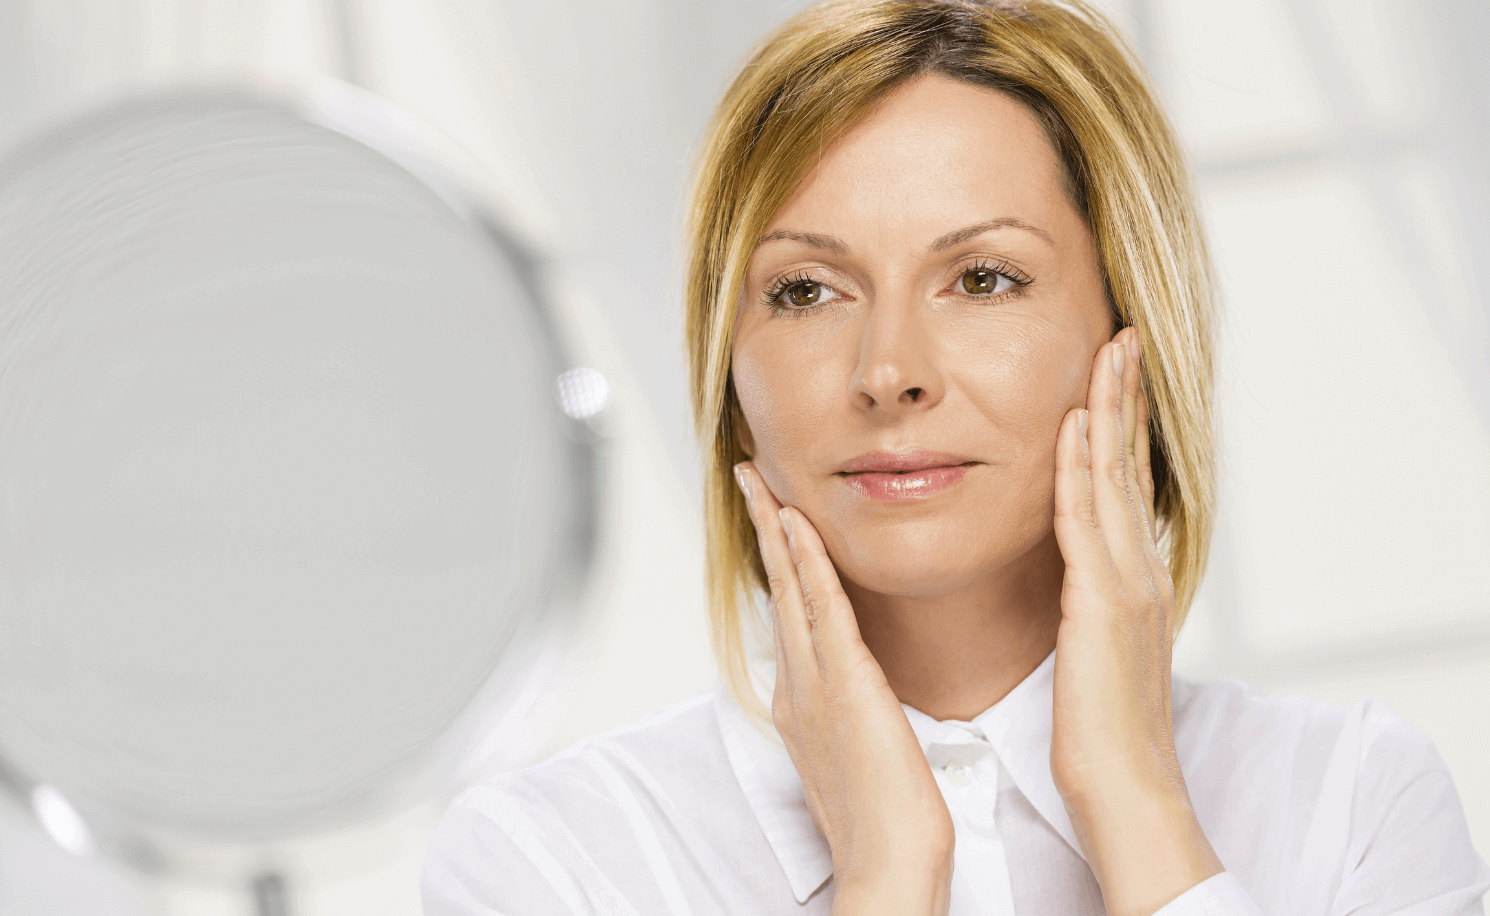 Rebecca Taylor: Woman asking when should I get Botox?